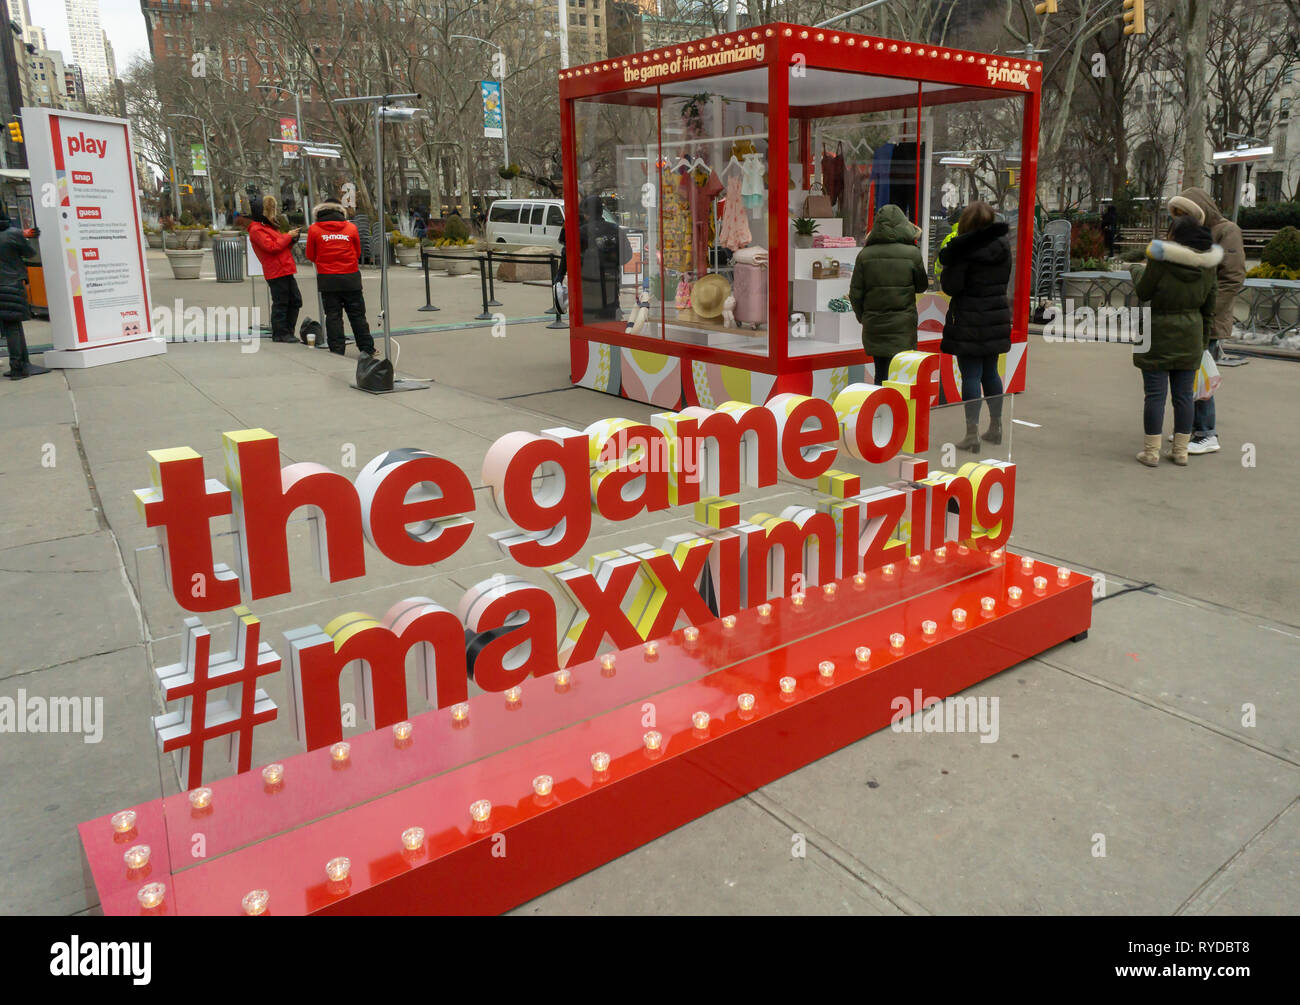 Contestants participate in a pricing competition for a $5 gift card from T.J. Maxx stores in Flatiron Plaza in New York on Wednesday, March 6, 2019. The TJX Companies, parent of Marshalls and T. J. Maxx, created the 'Game of Maxximizing' promotion as a branding event.  (Â© Richard B. Levine) Stock Photo